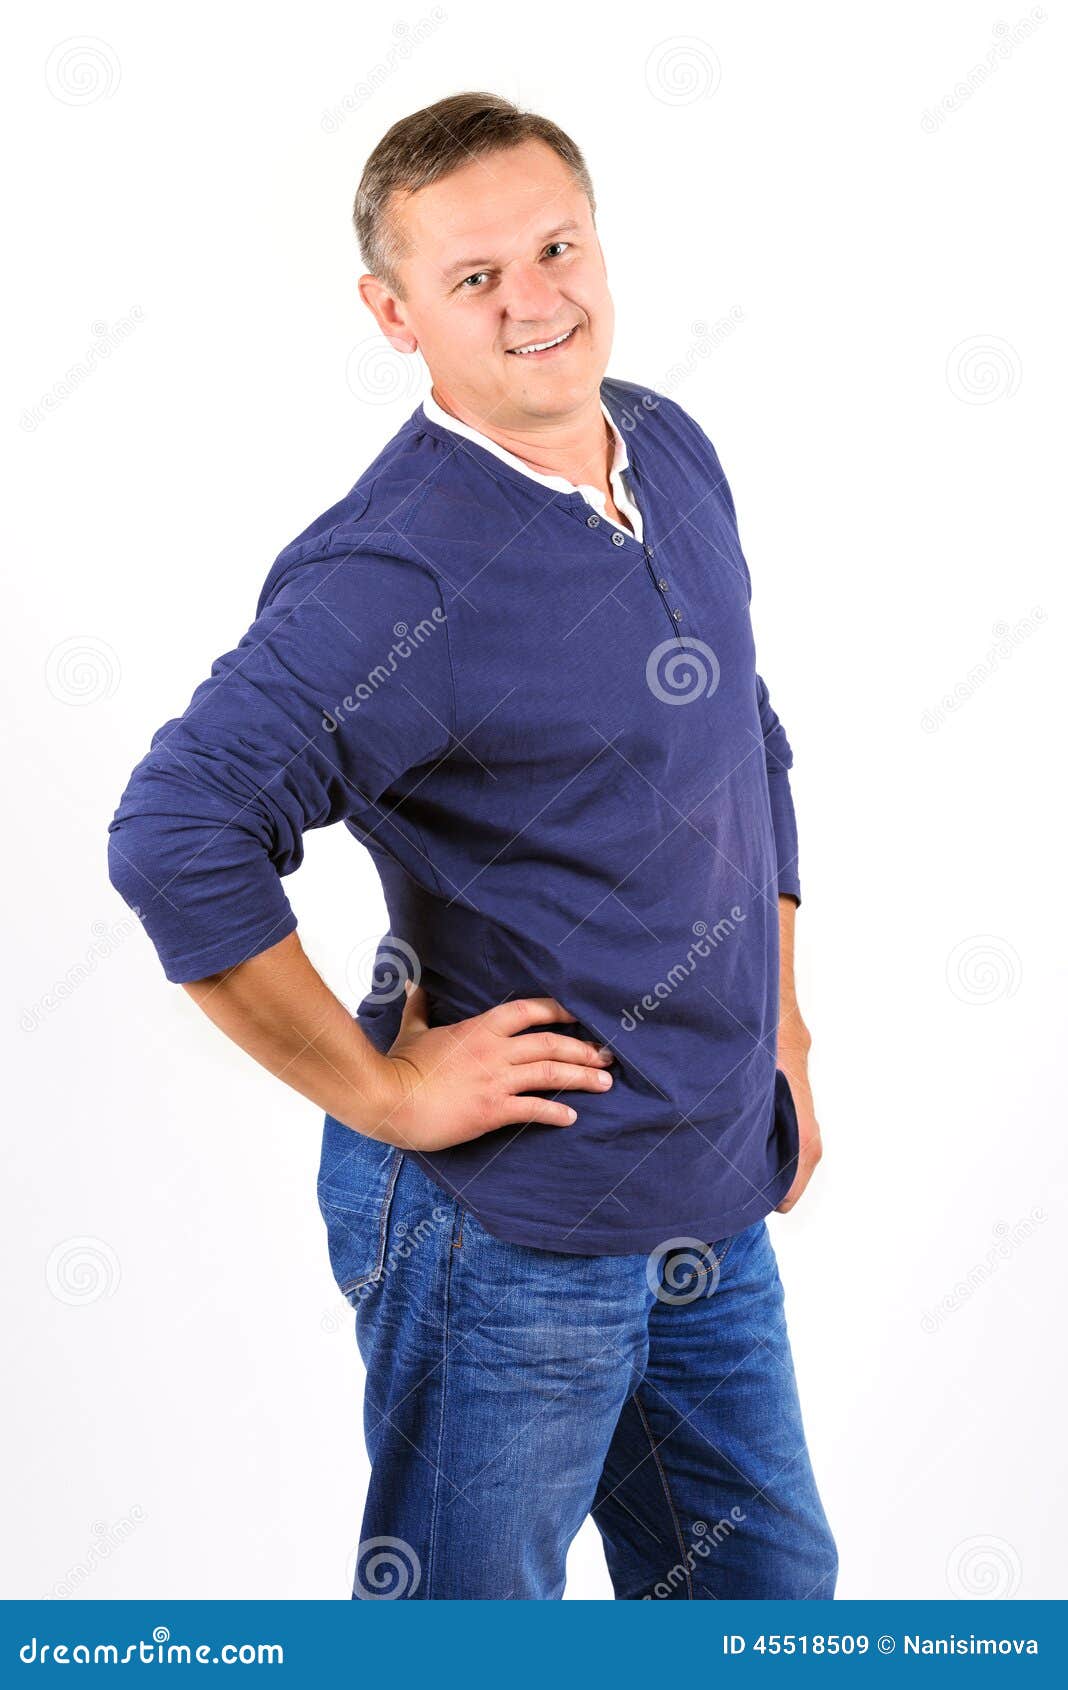 Casually Dressed Middle Aged Man in Jeans and Smiling Stock Image ...